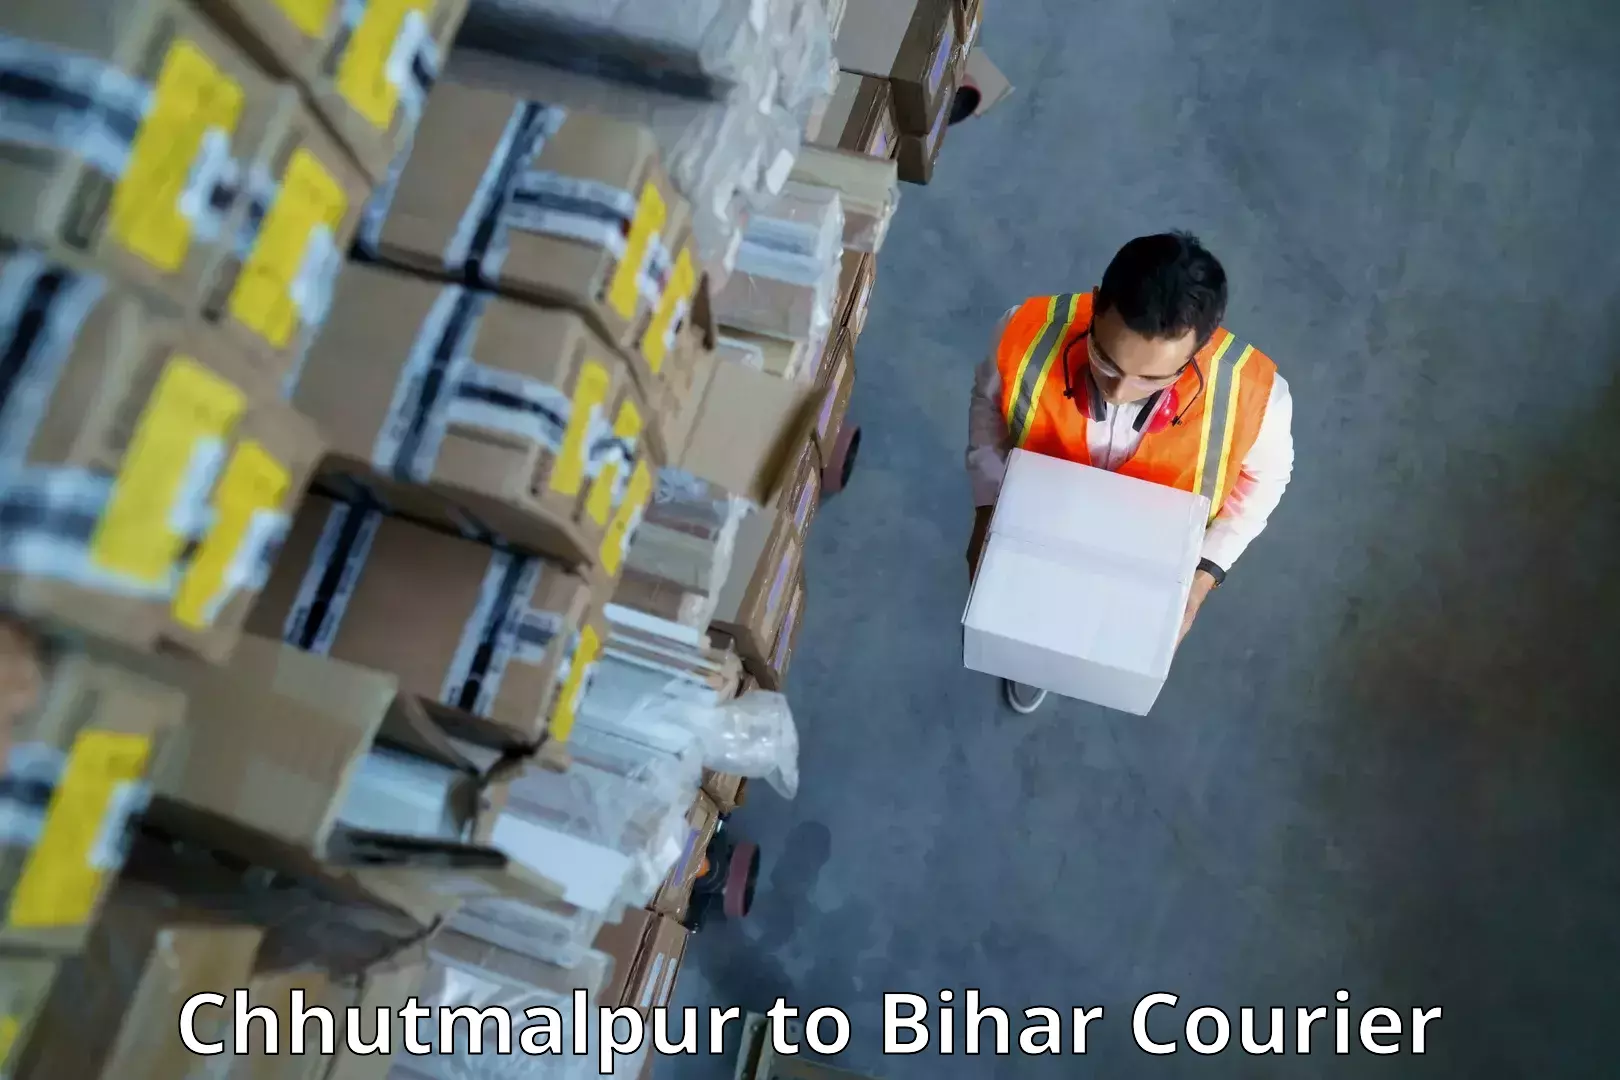 Business delivery service Chhutmalpur to Bhojpur